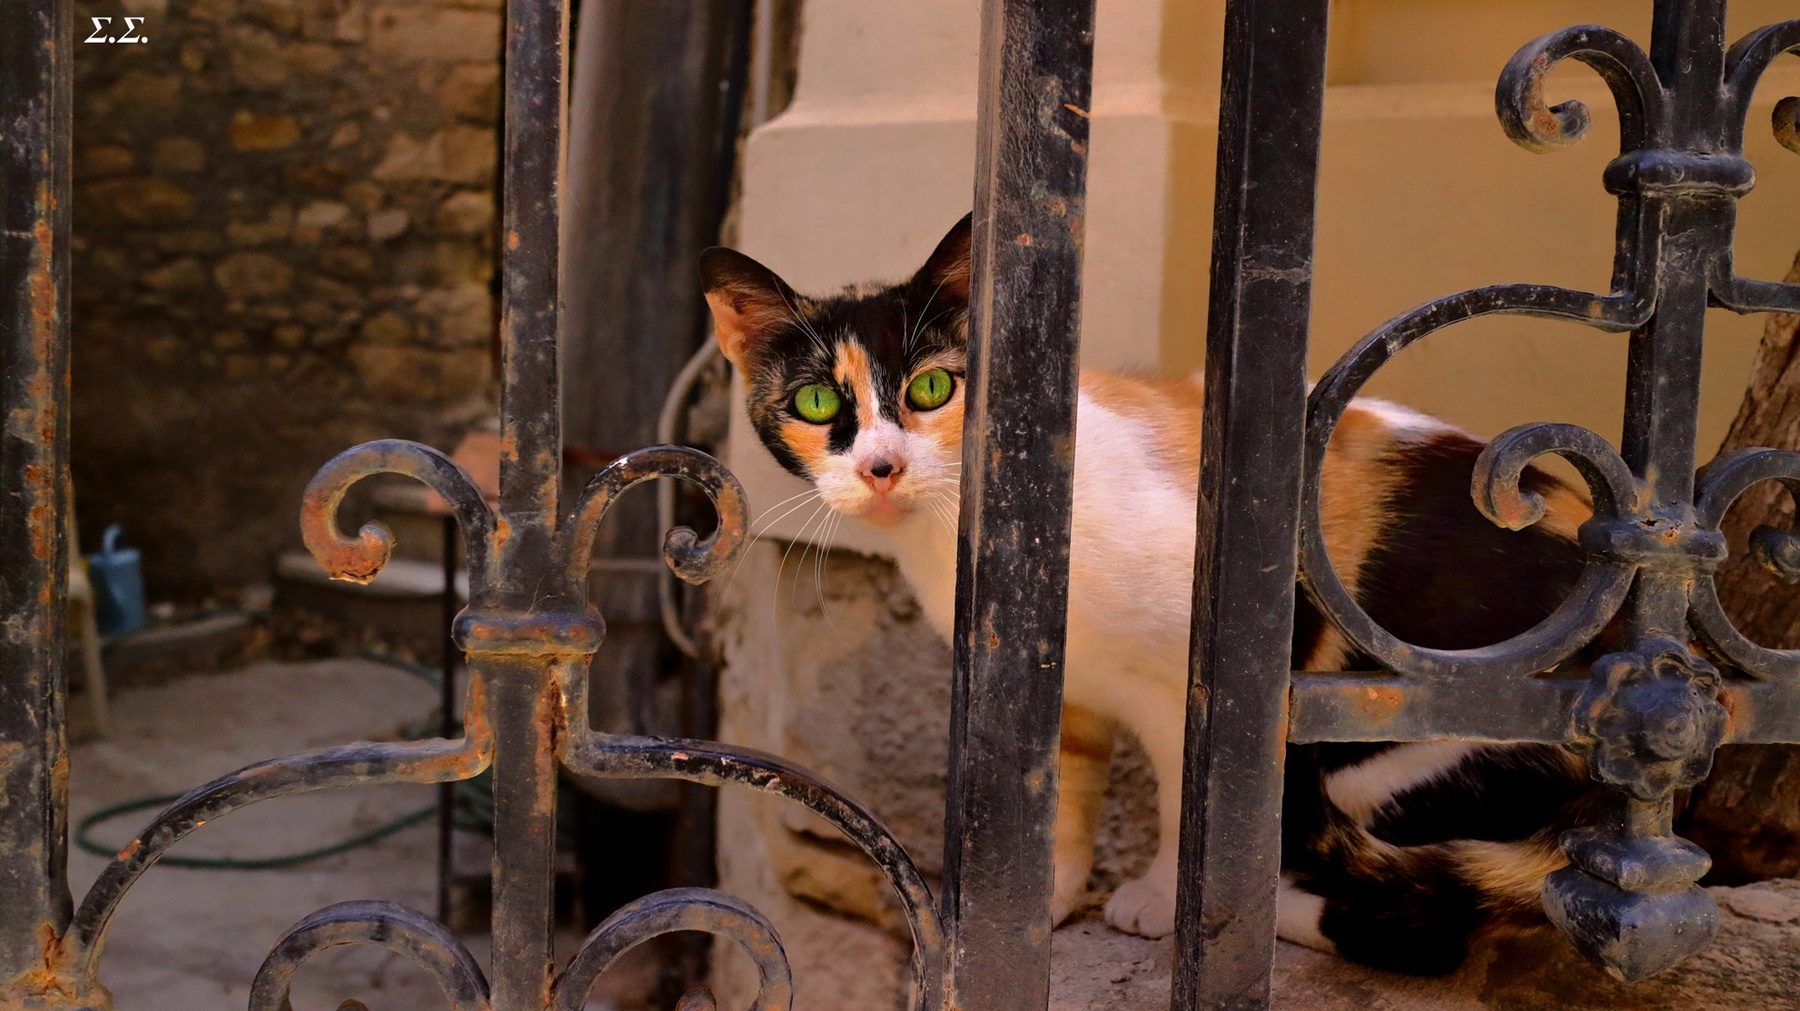 CAT BEHIND THE BARS 